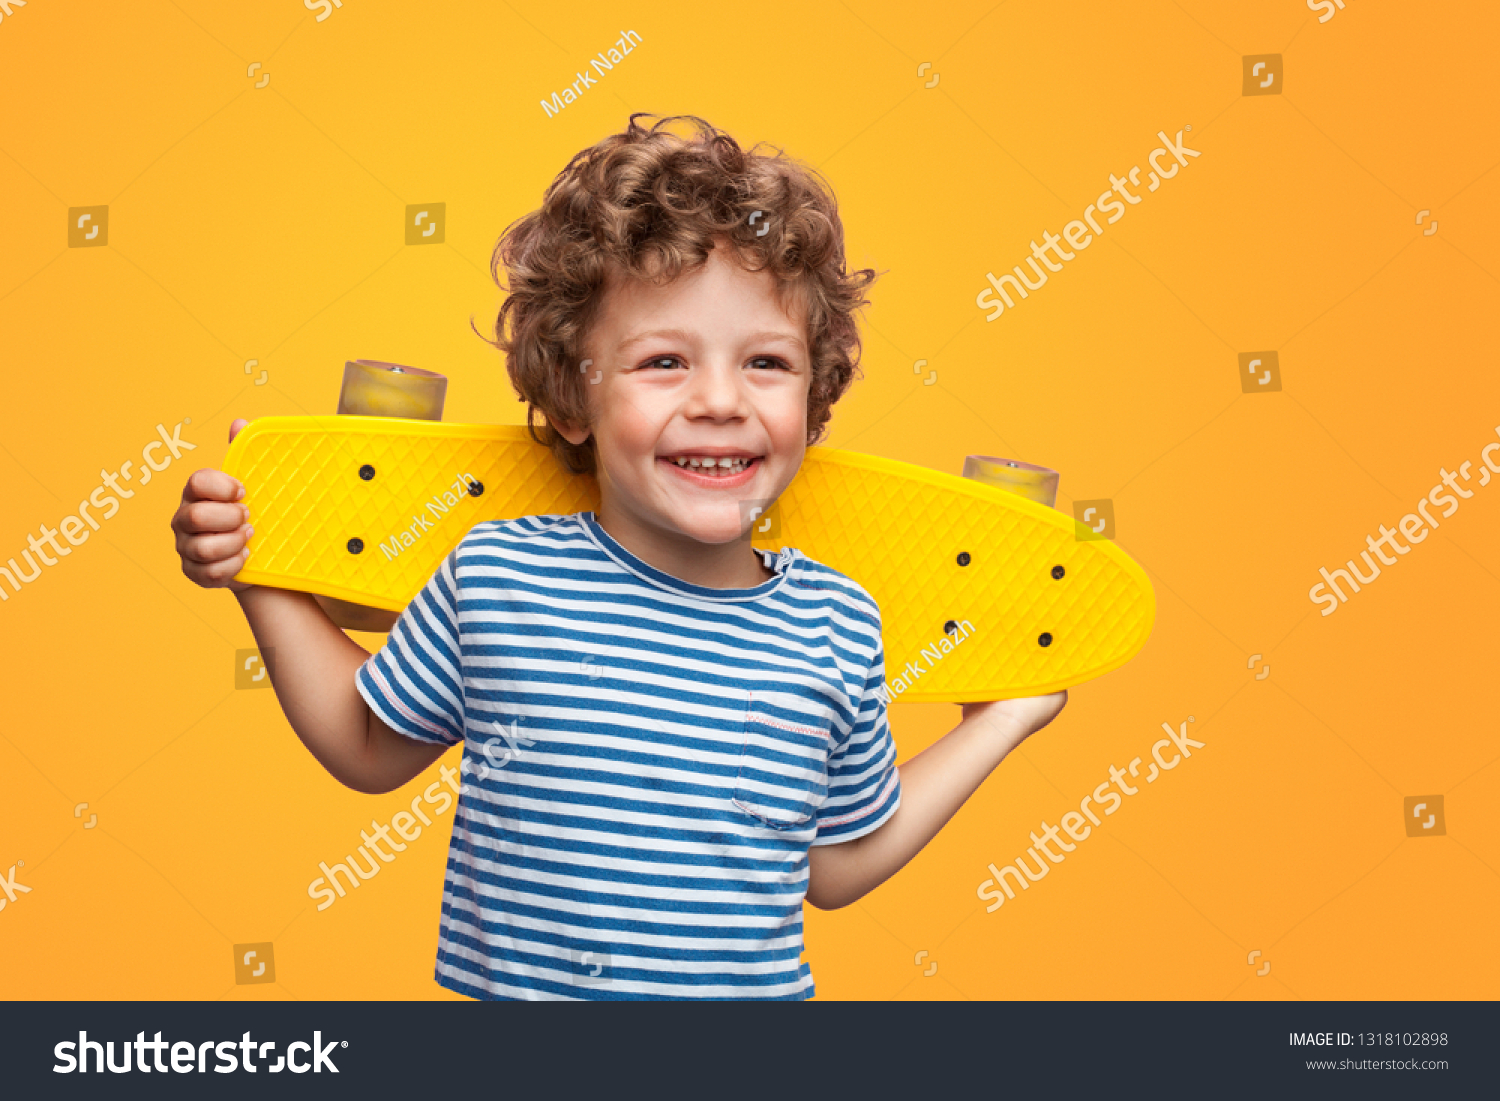 Happy little kid in striped t-shirt holding yellow longboard and smiling away on orange background #1318102898